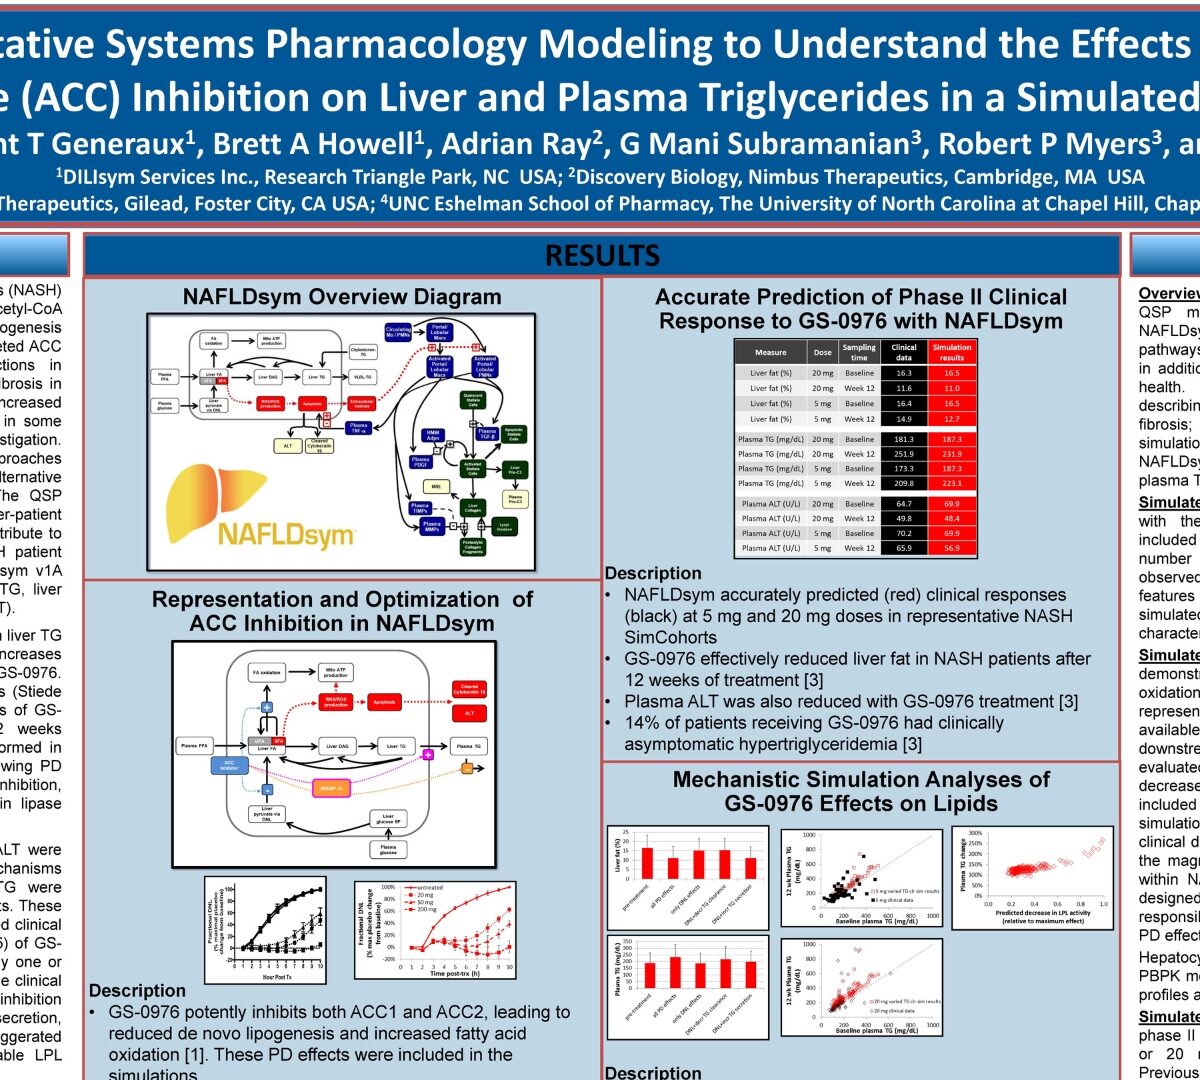 Using Quantitative Systems Pharmacology Modeling to Understand the Effects of Acetyl CoA Carboxylase (ACC) Inhibition on Liver and Plasma Triglycerides in a Simulated Population